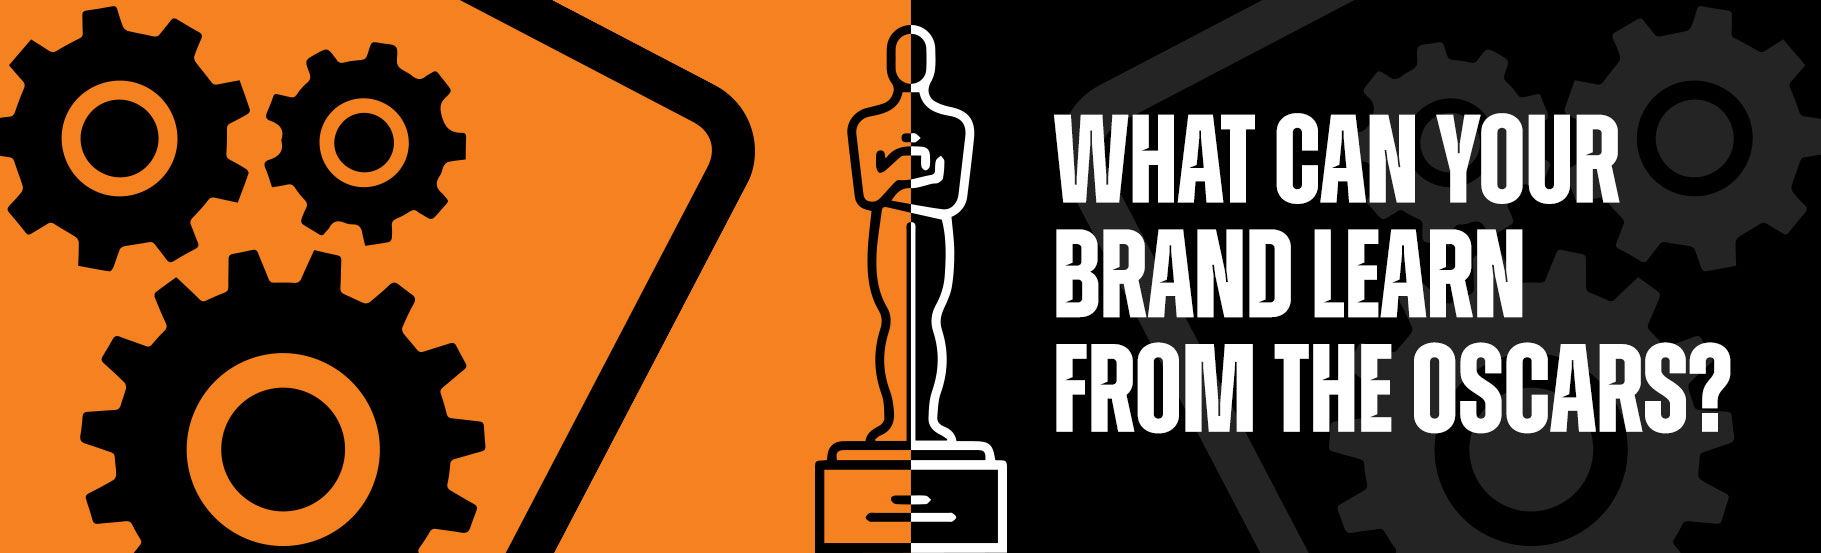 What can your brand learn from the Oscars?